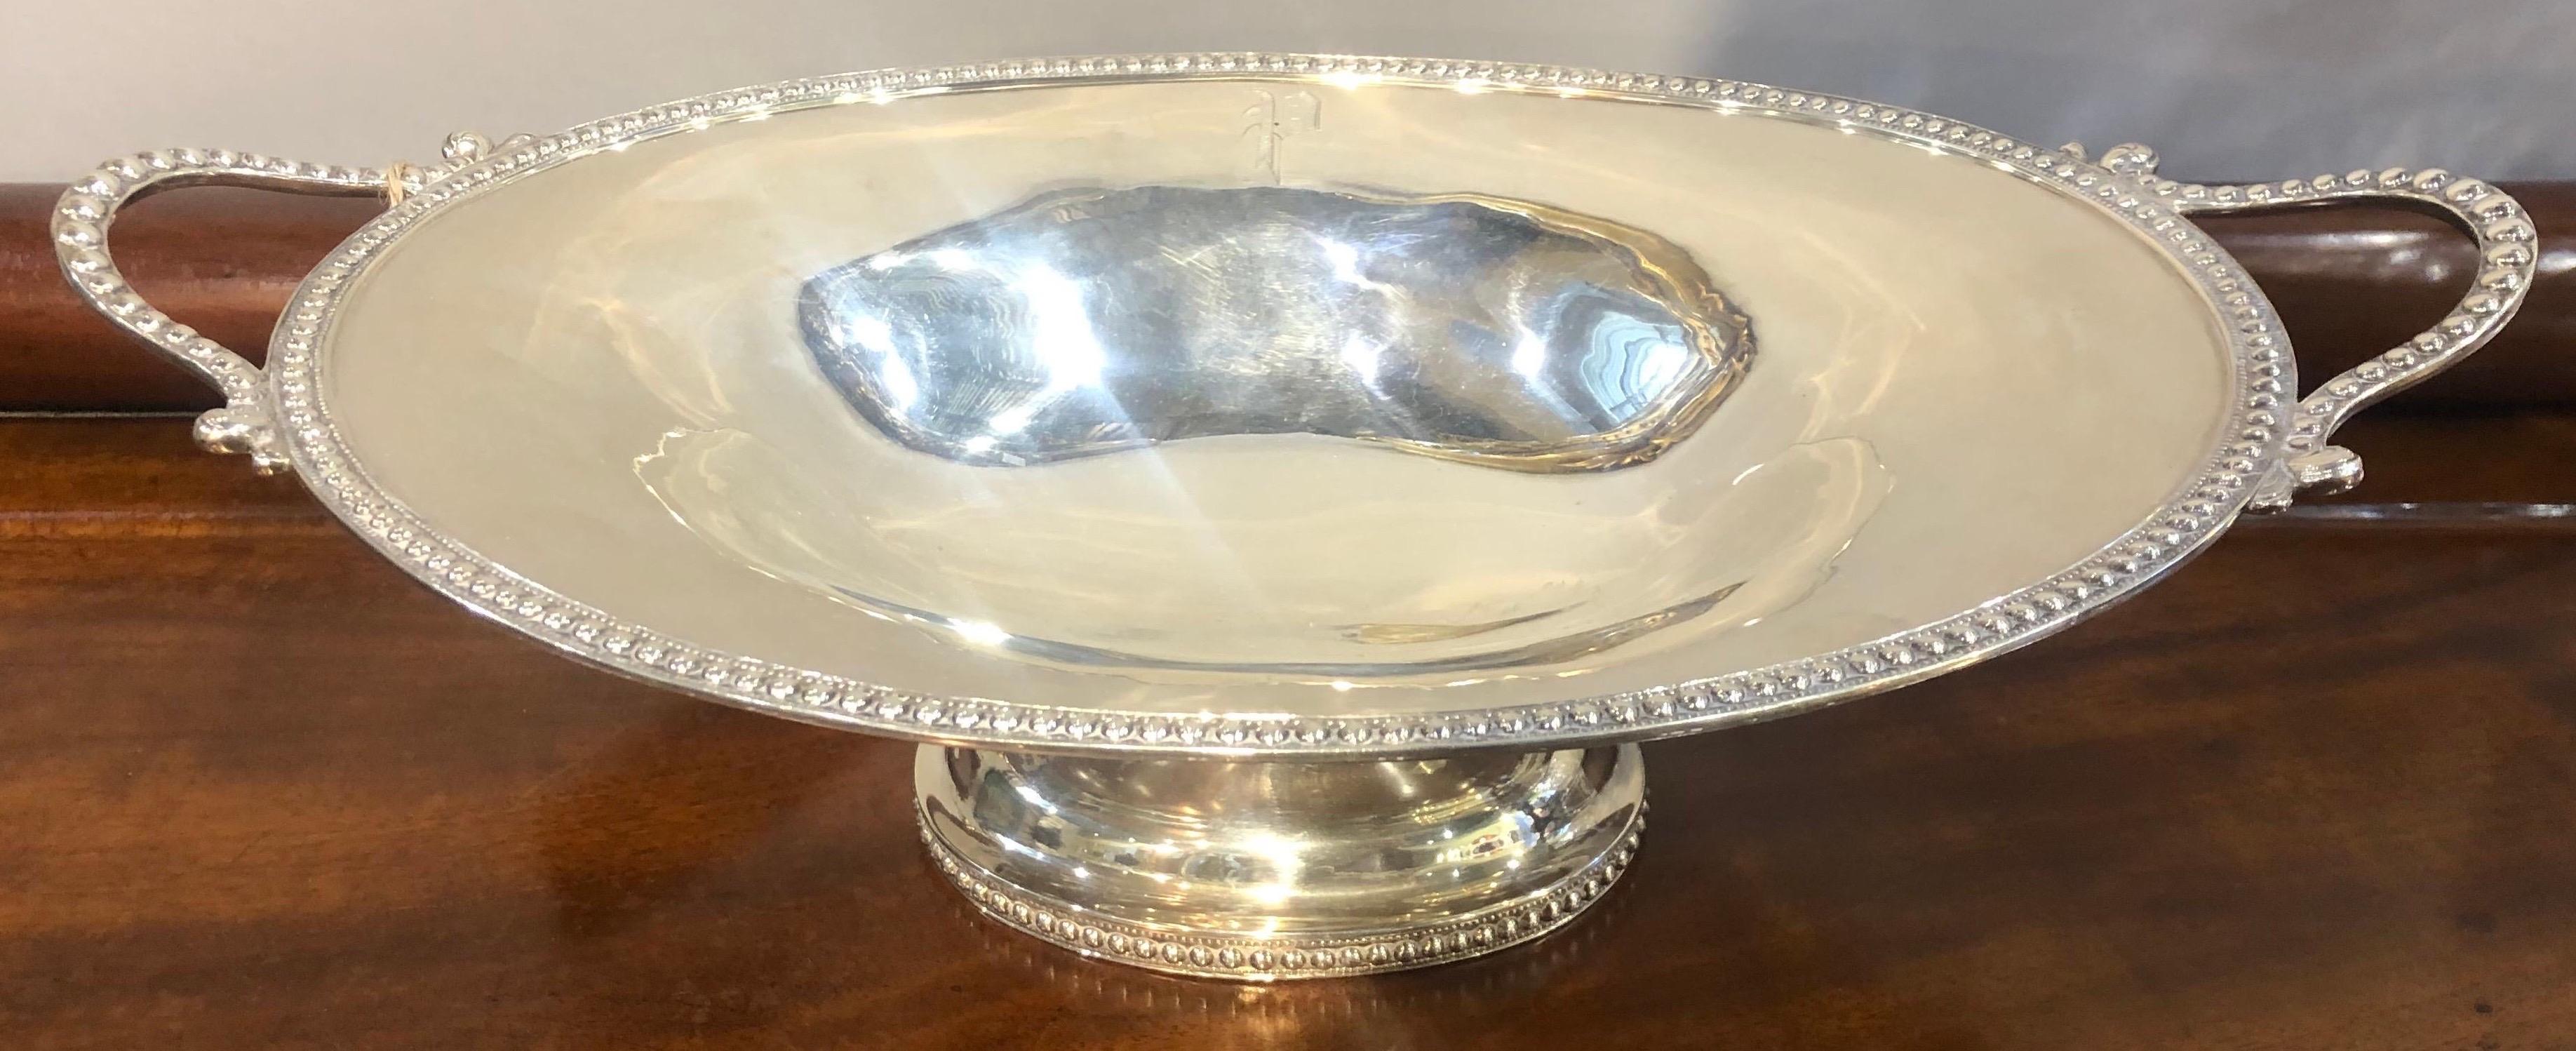 19th Century New York Made Silver Fruit Bowl For Sale 1